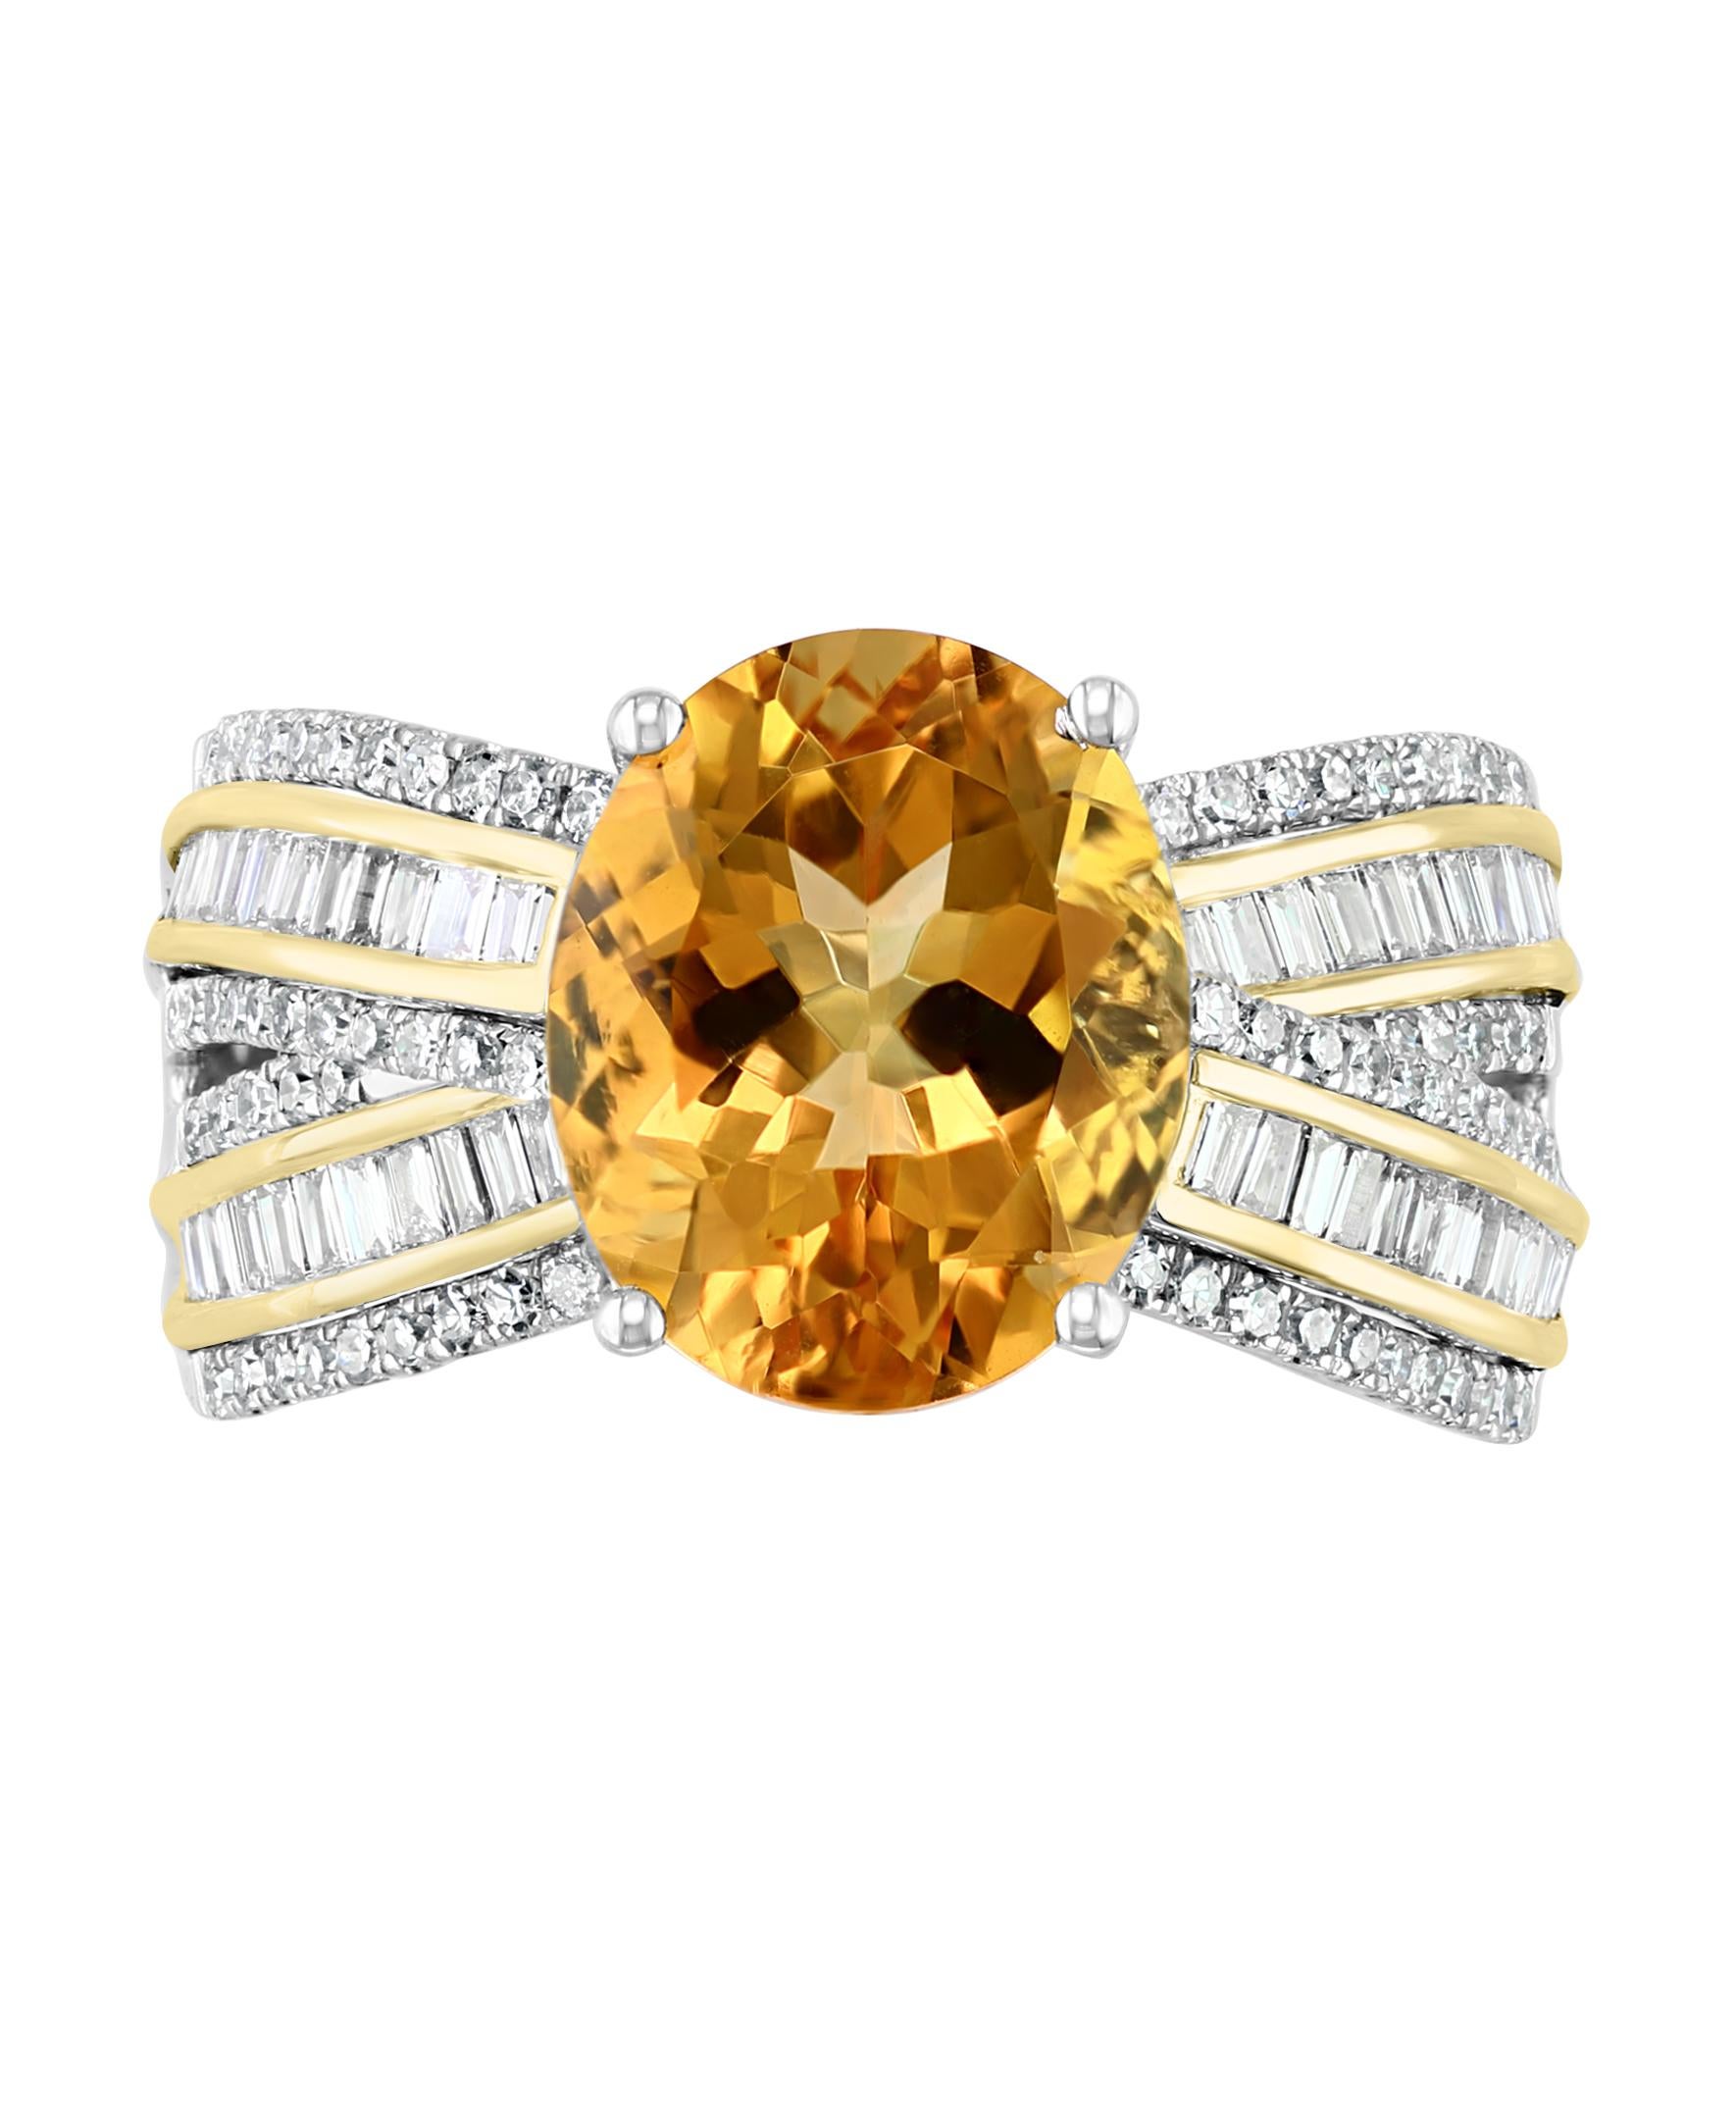 This Effy design ring is set in 14K white and yellow gold. 
The center stone is an oval shape Citrine and the weight is 3.20 ct.
The diamonds are baguette and round in shape and the total weight is 0.58 ct.
This ring is a sizable 7. 
The item number